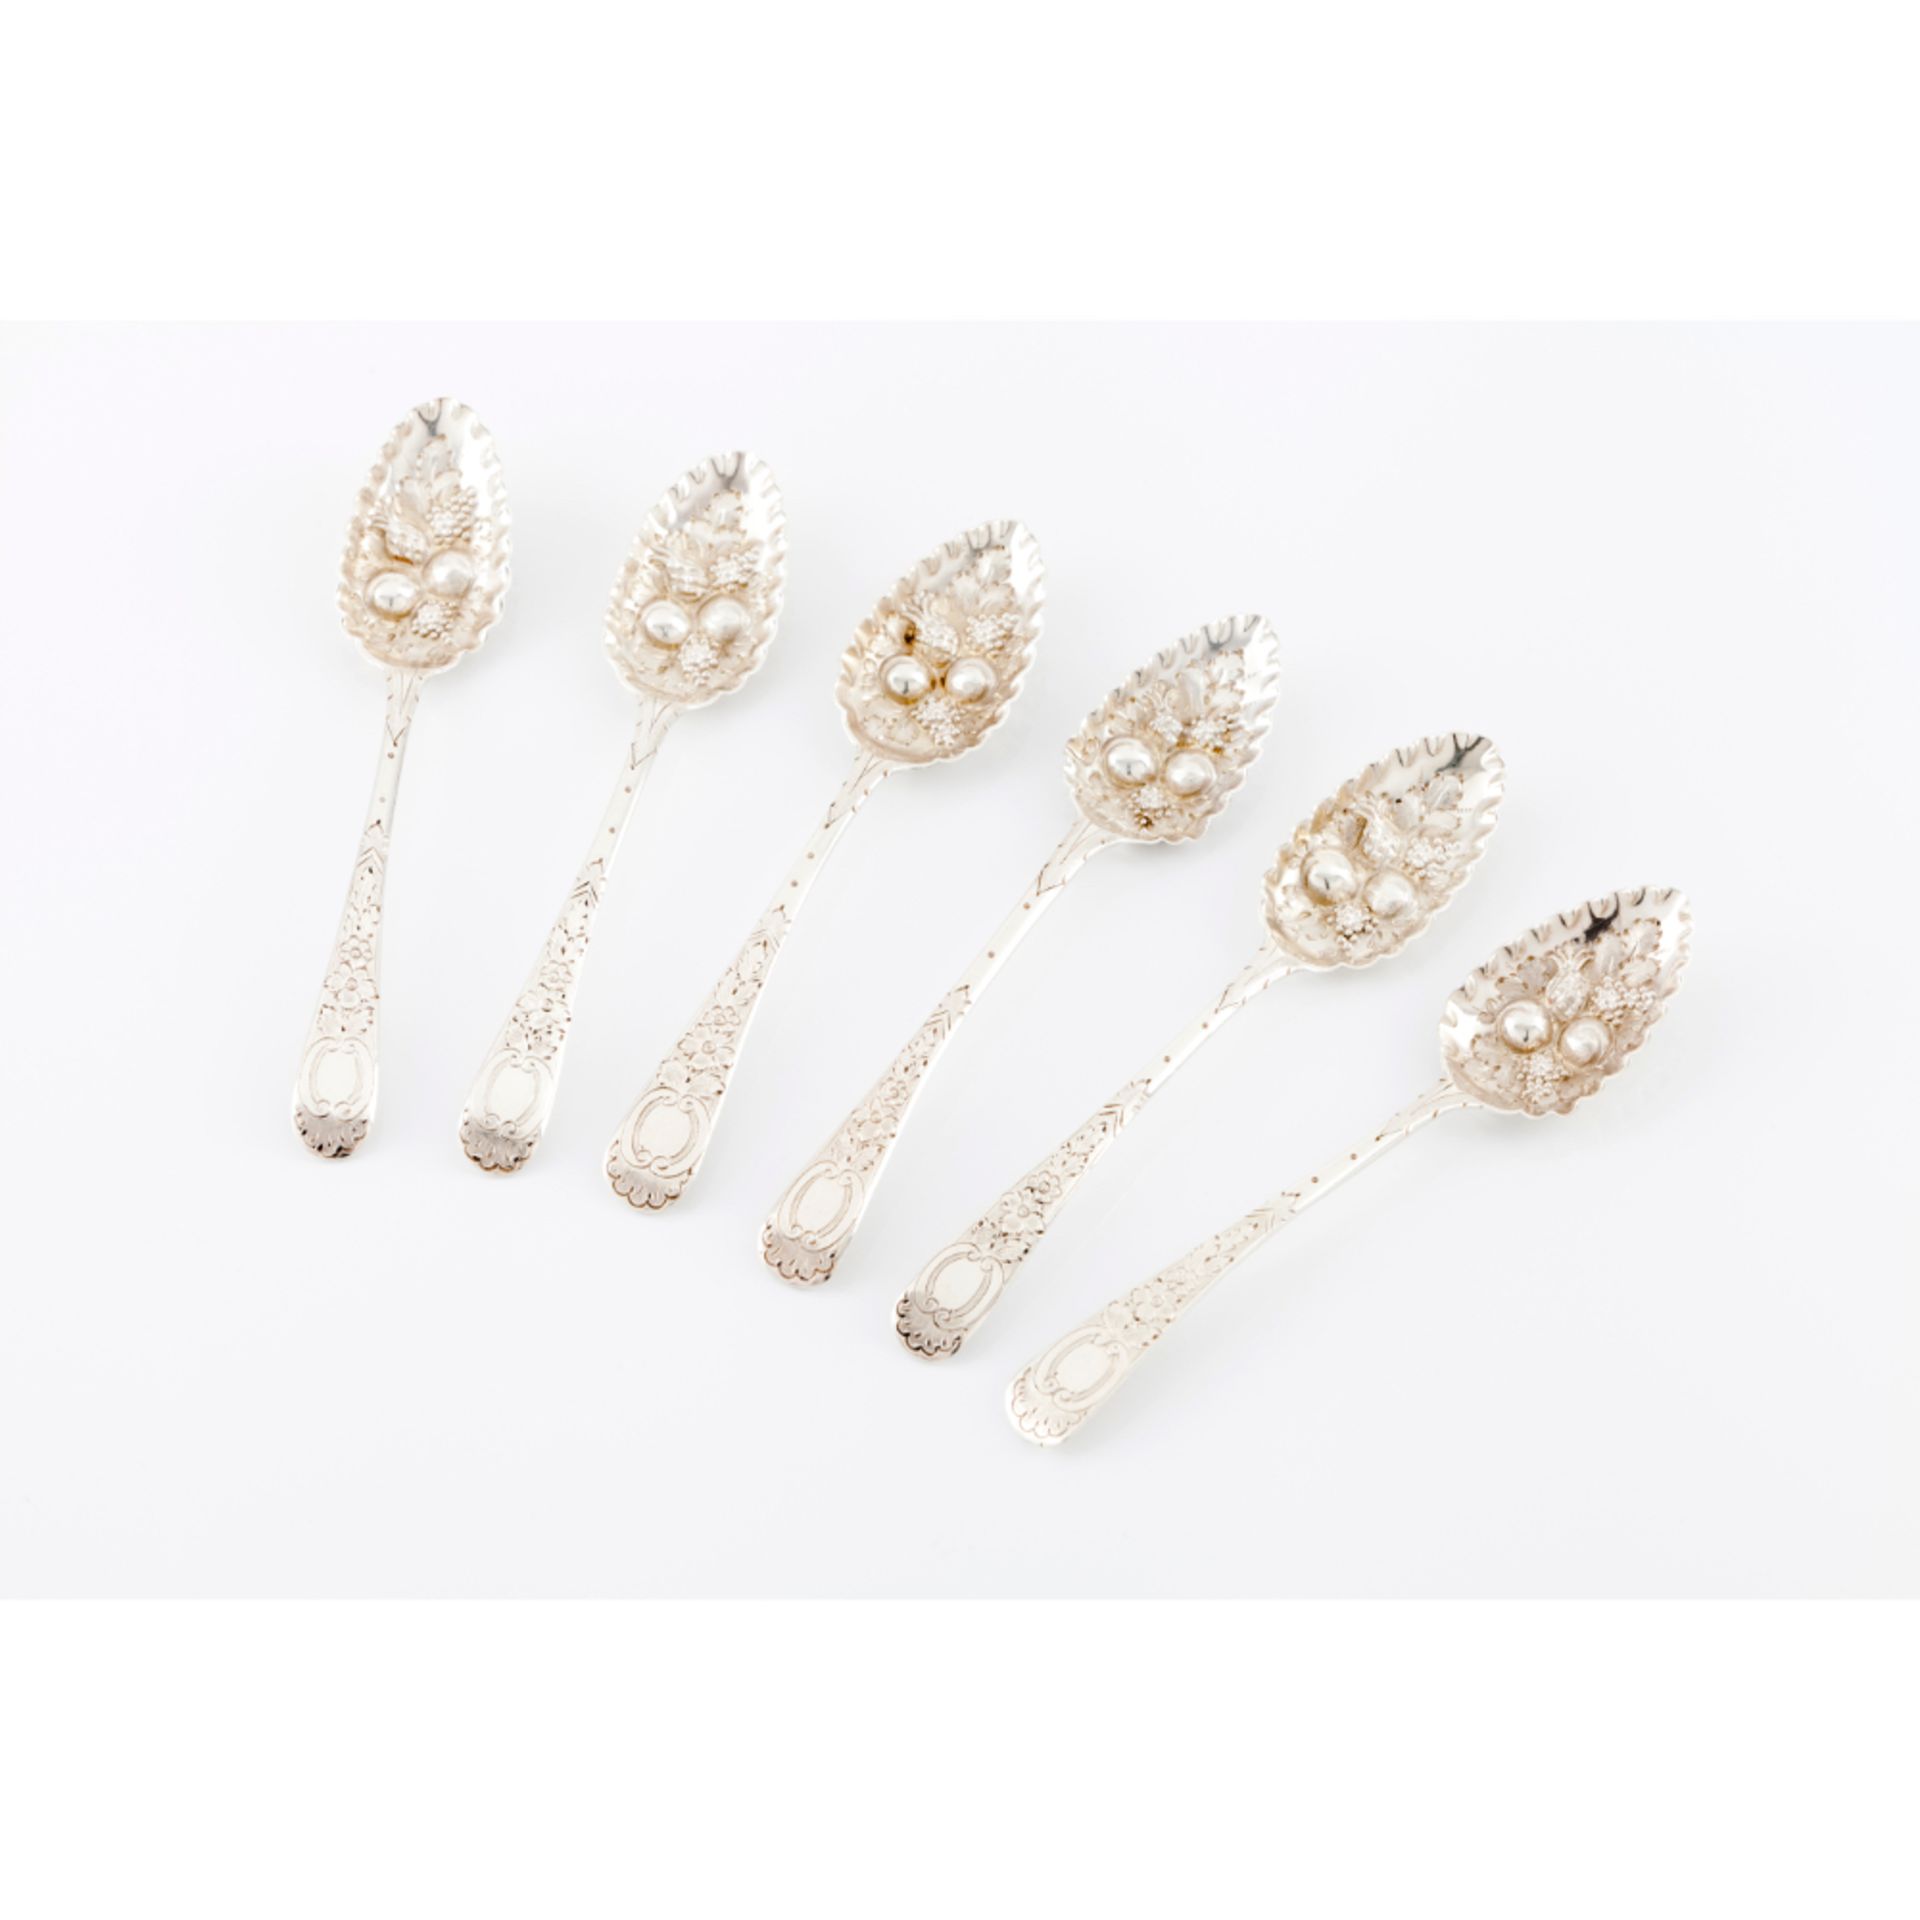 A set of 6 berry spoons